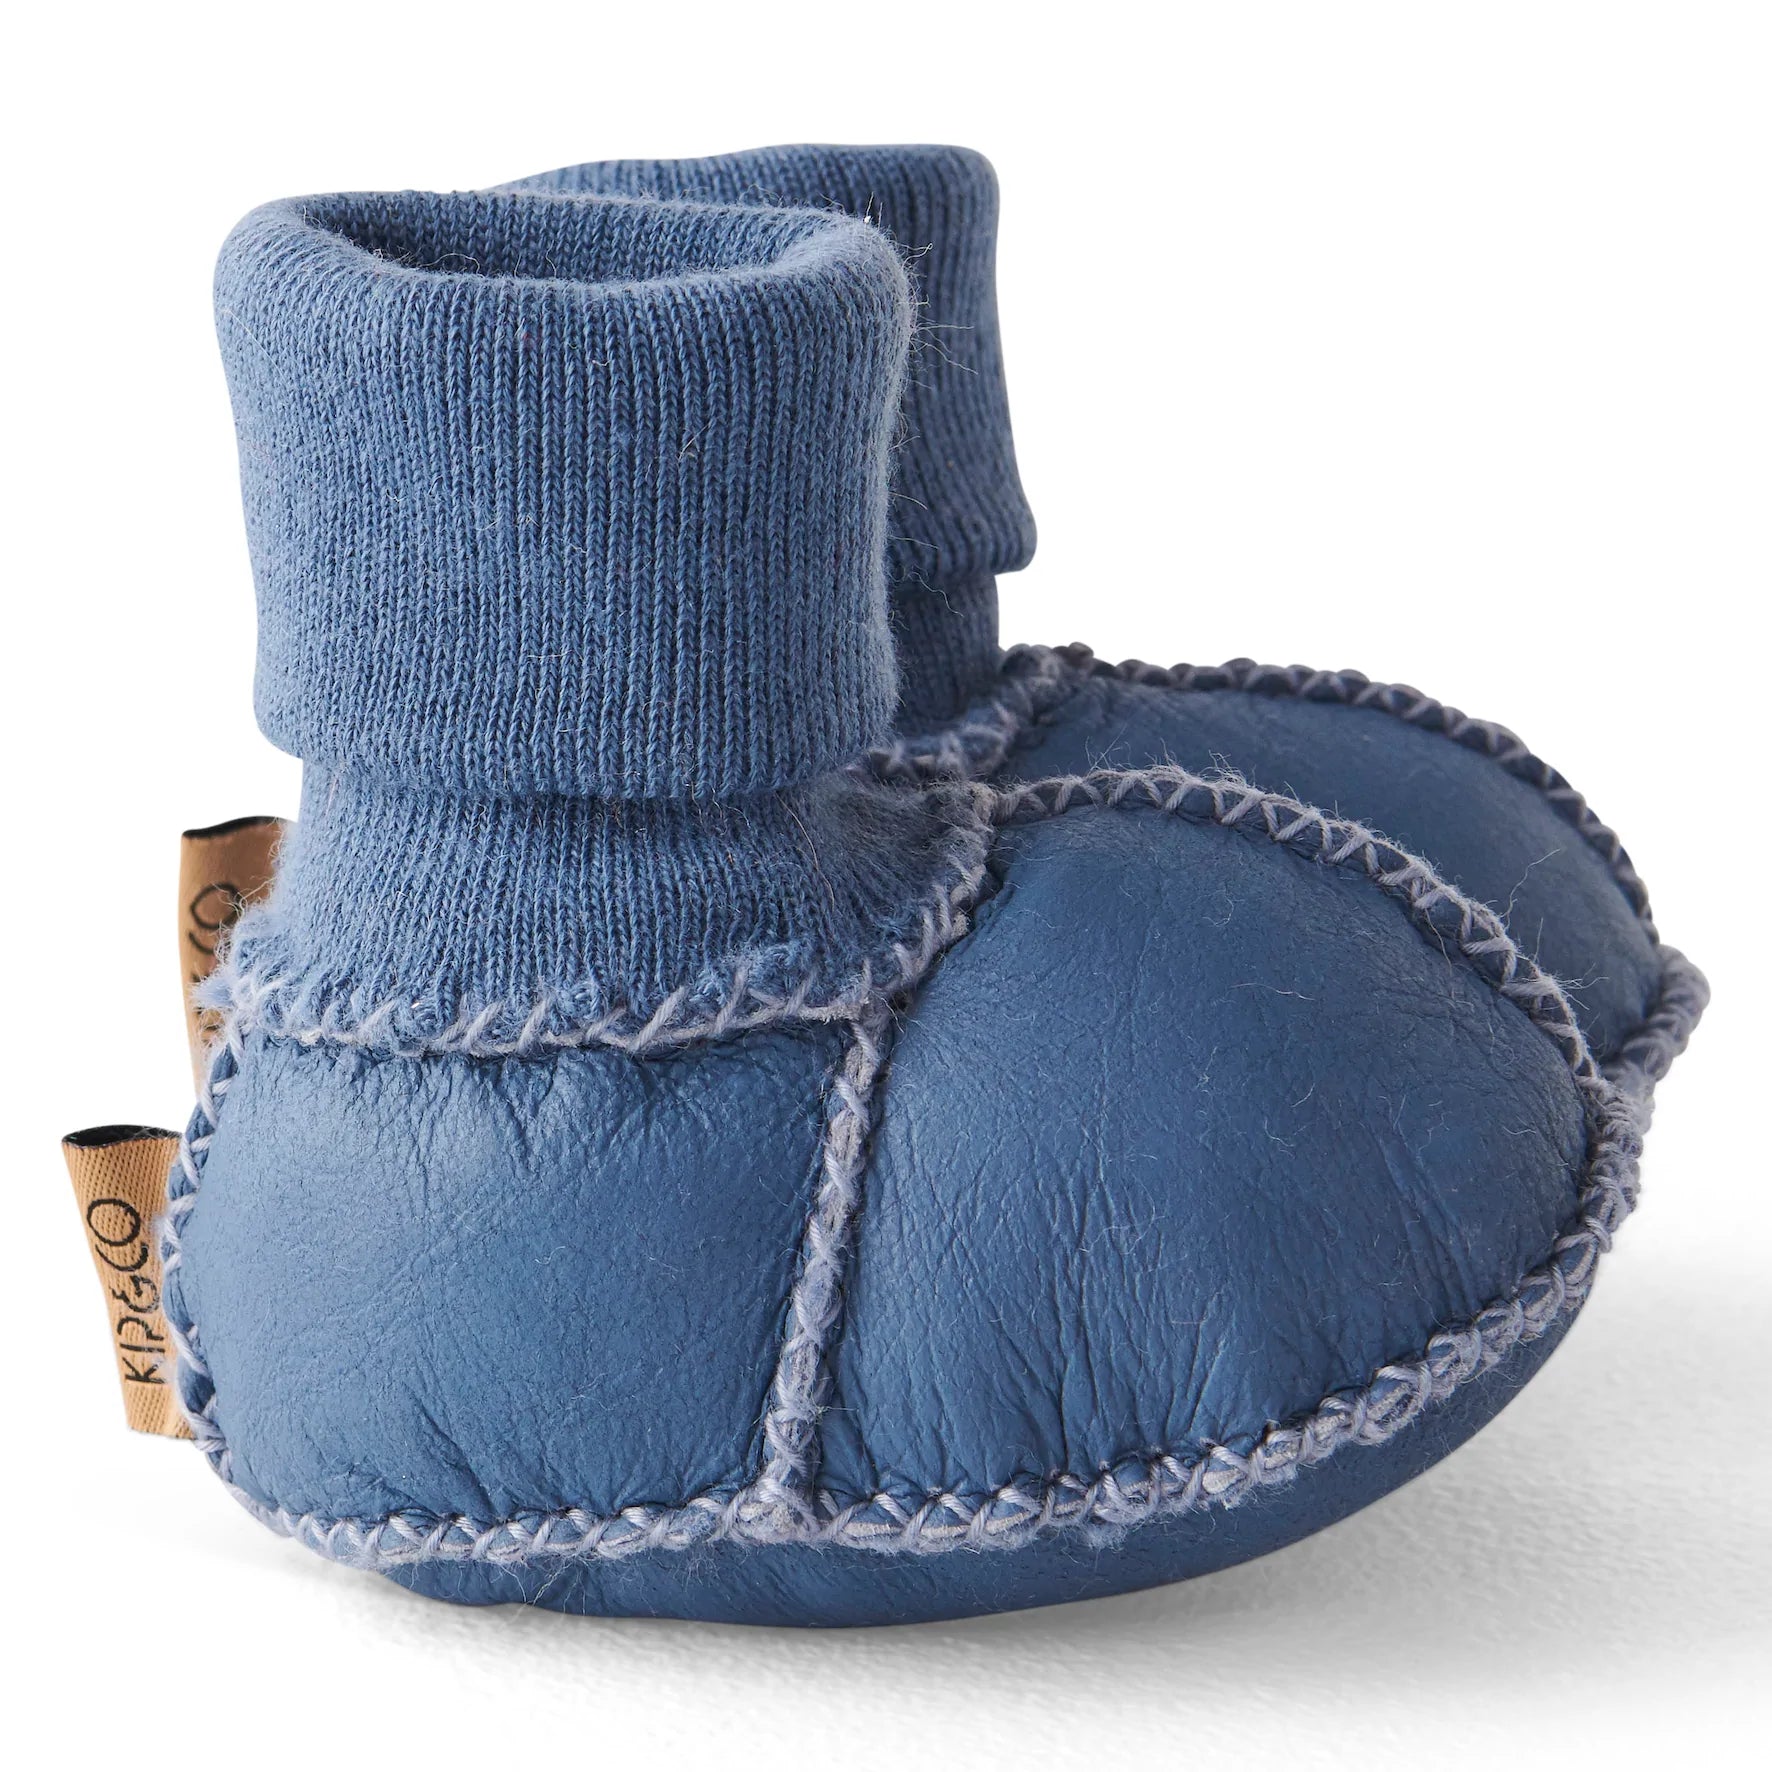 KIP & CO BABY BOOTS: BLUE SKIES